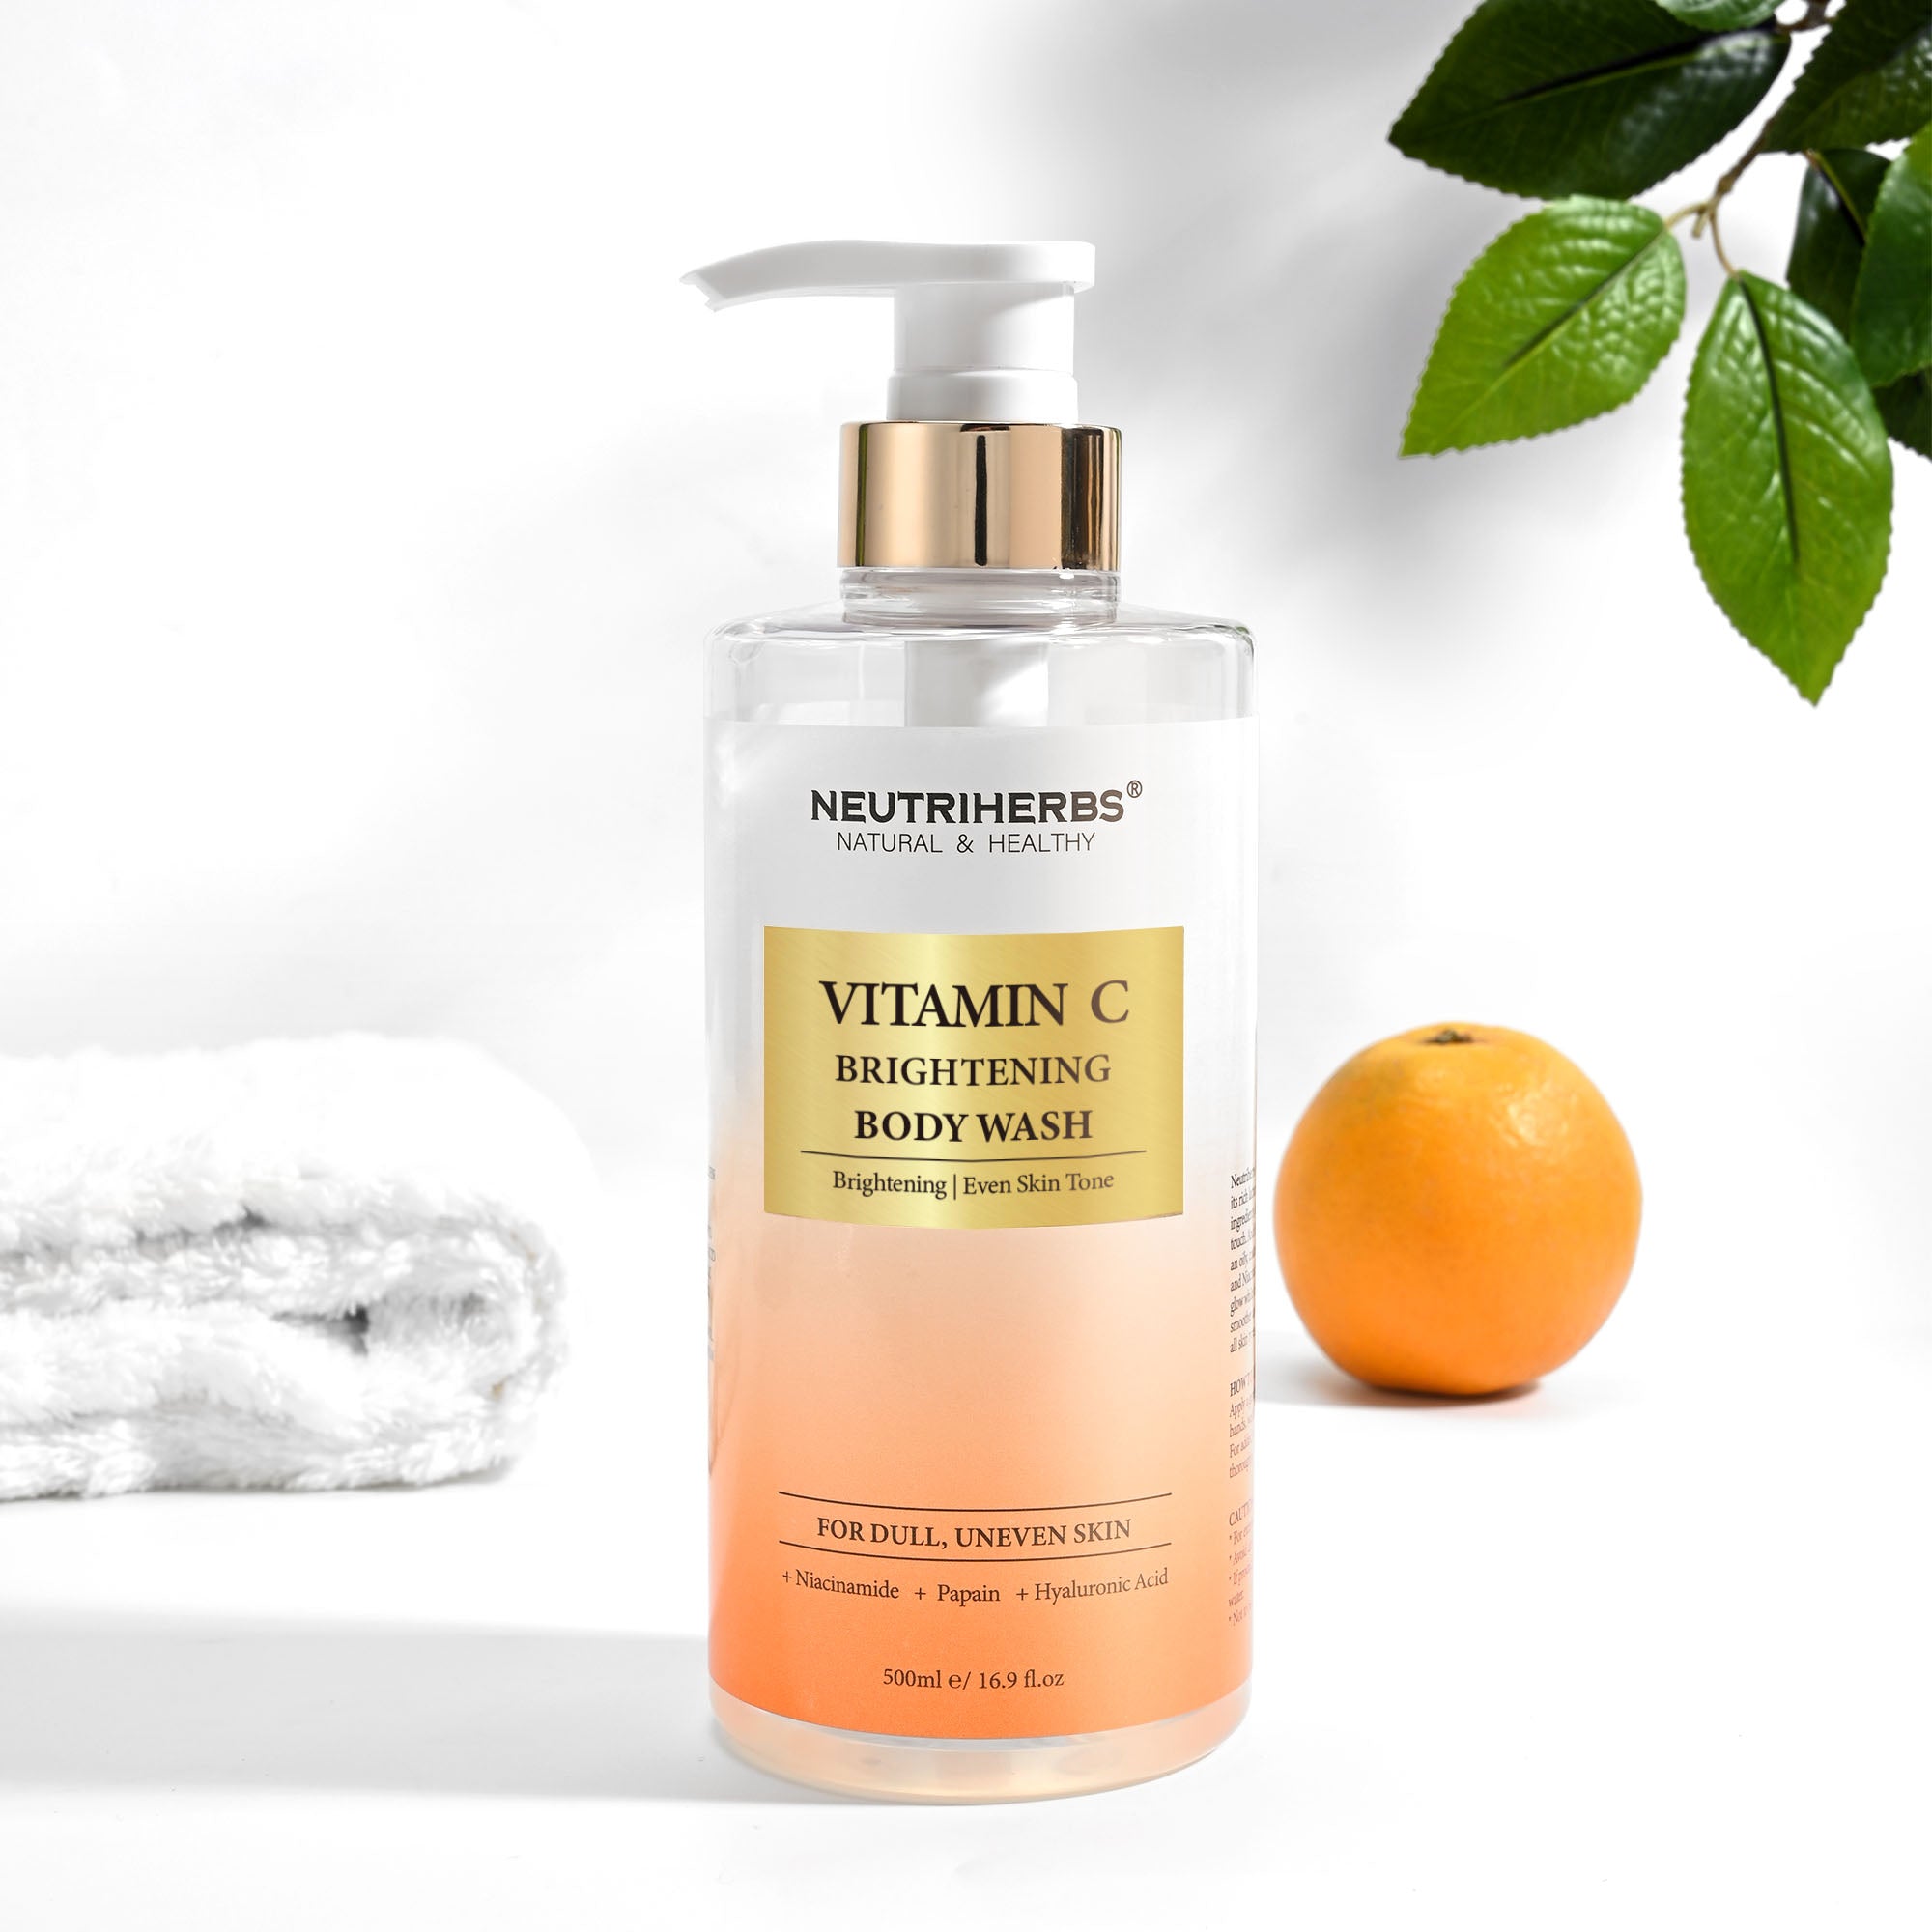 Say Goodbye to Dull Skin with Our Brightening Body Wash